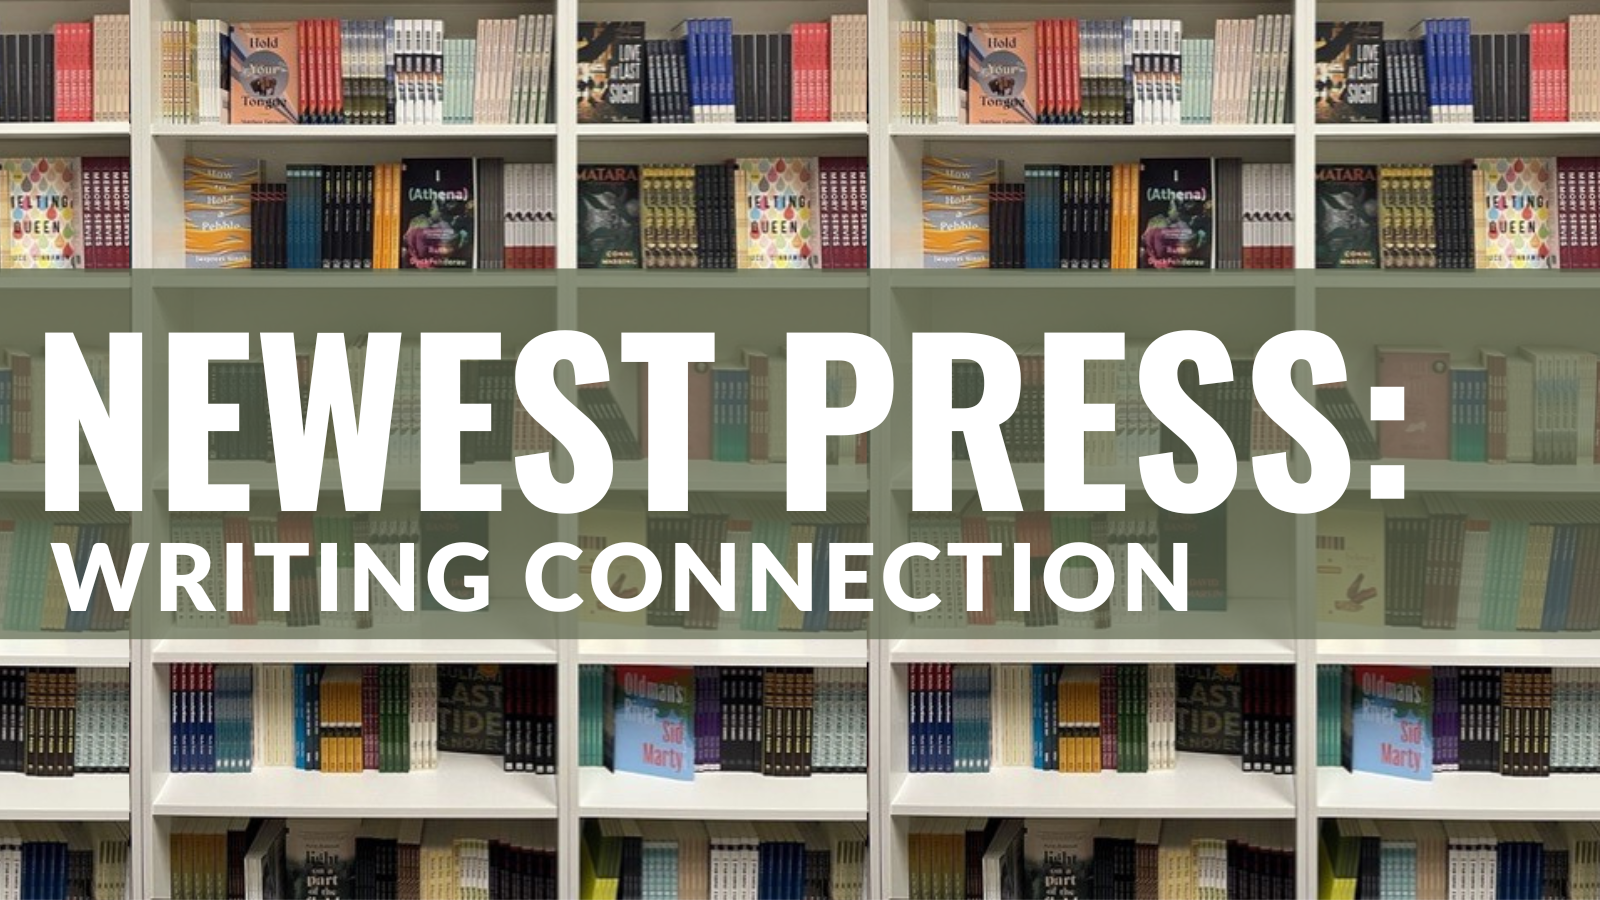 NeWest Press: Writing Connection